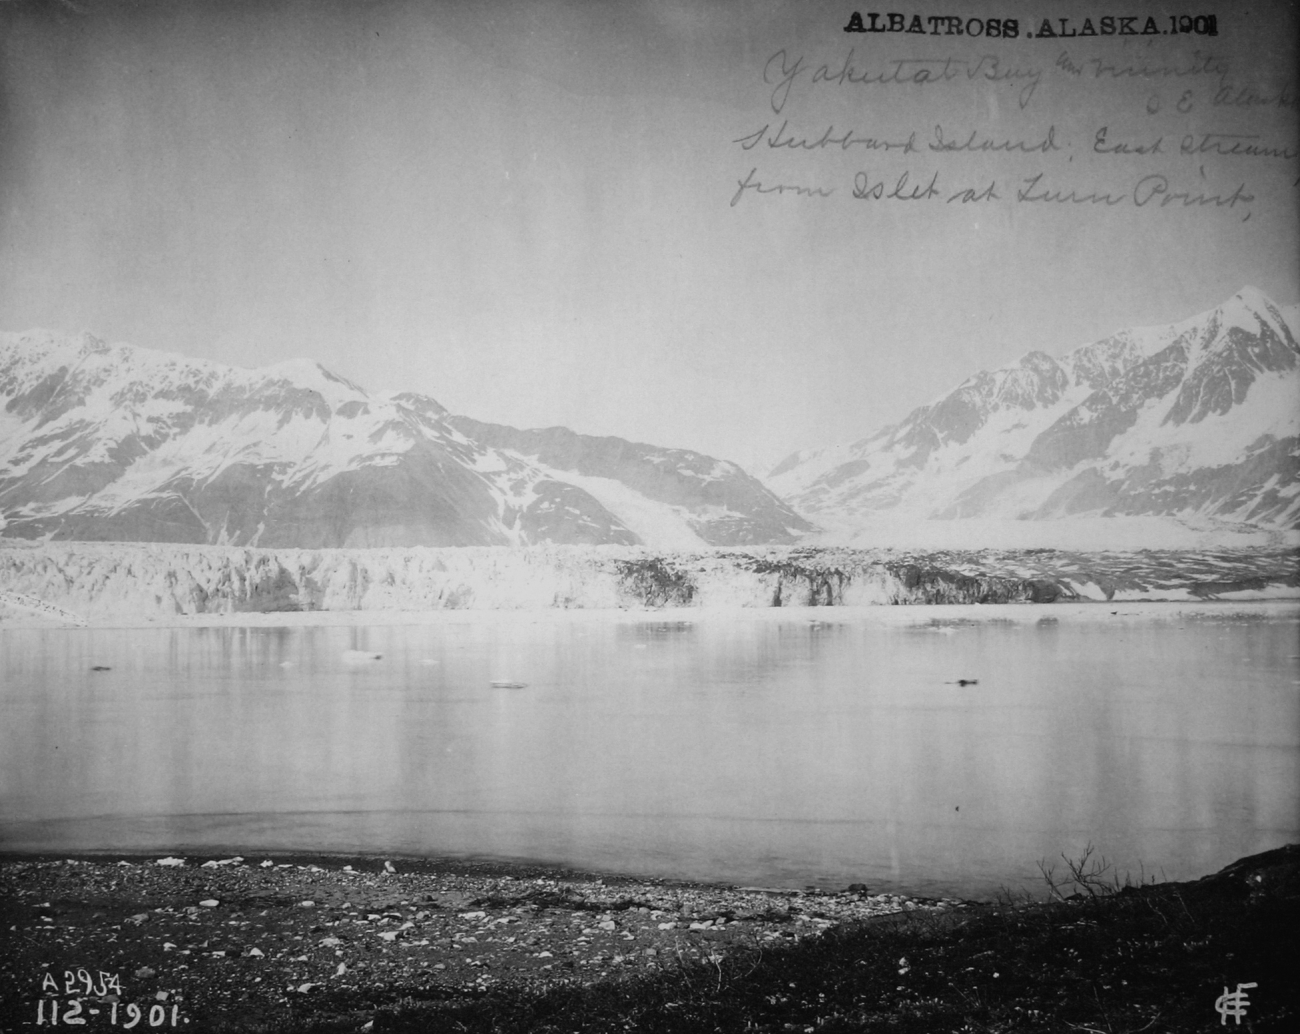 Albatross, AK, 1901, Yakutat Bay and vicinity, Hubbard Island,east stream from islet at Lurn Point